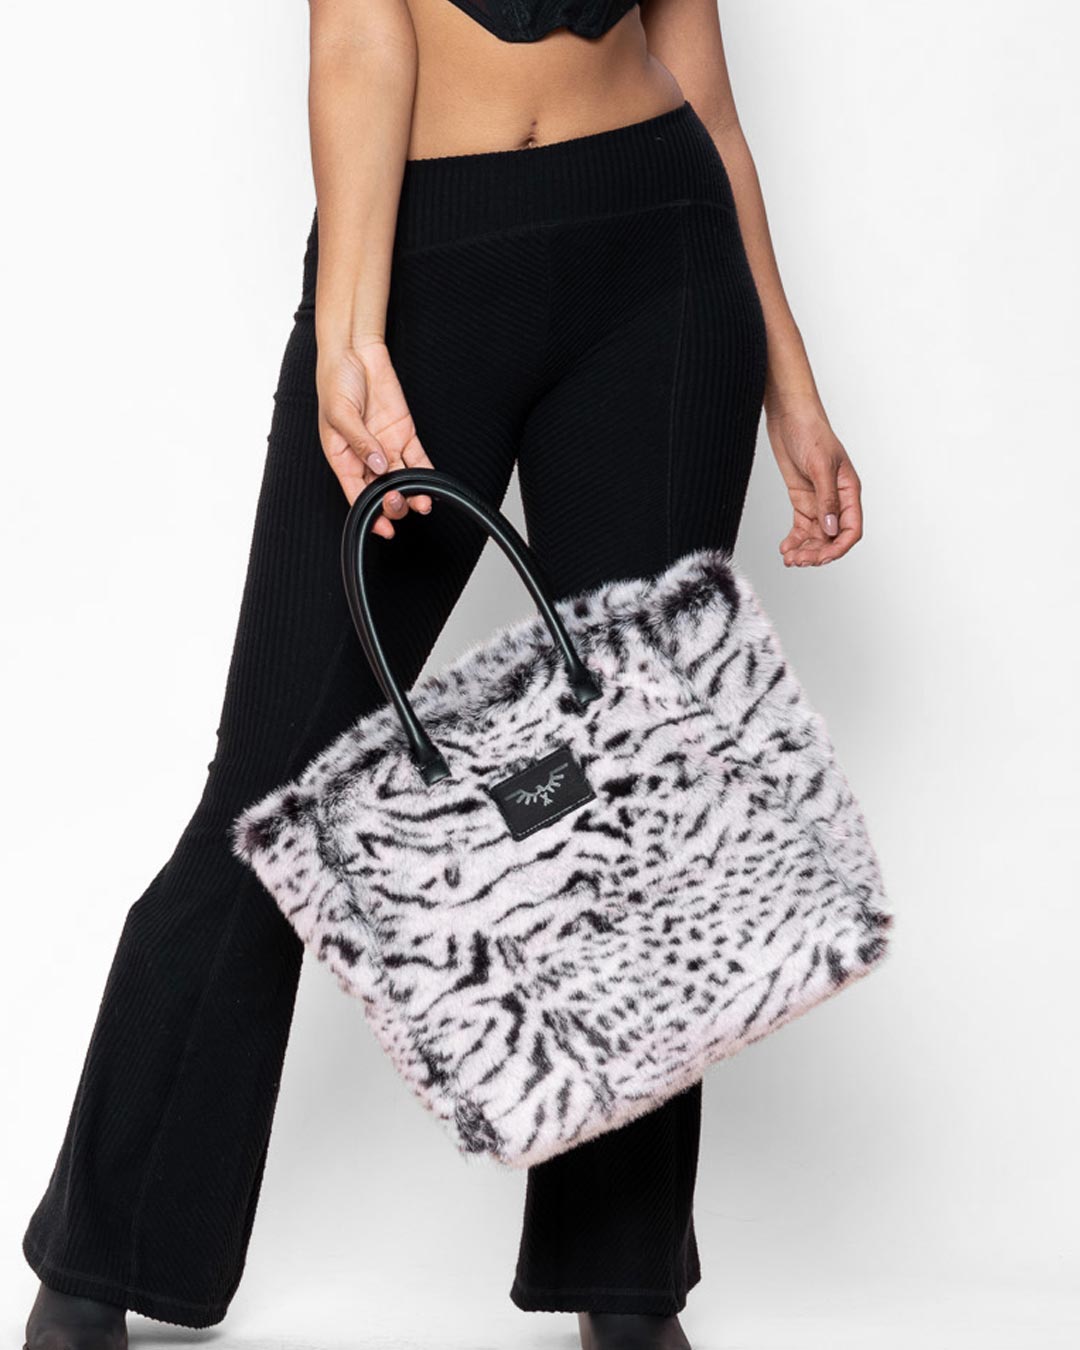 Chic Elegance: White Tiger Faux Fur Tote Bag for Effortless Style